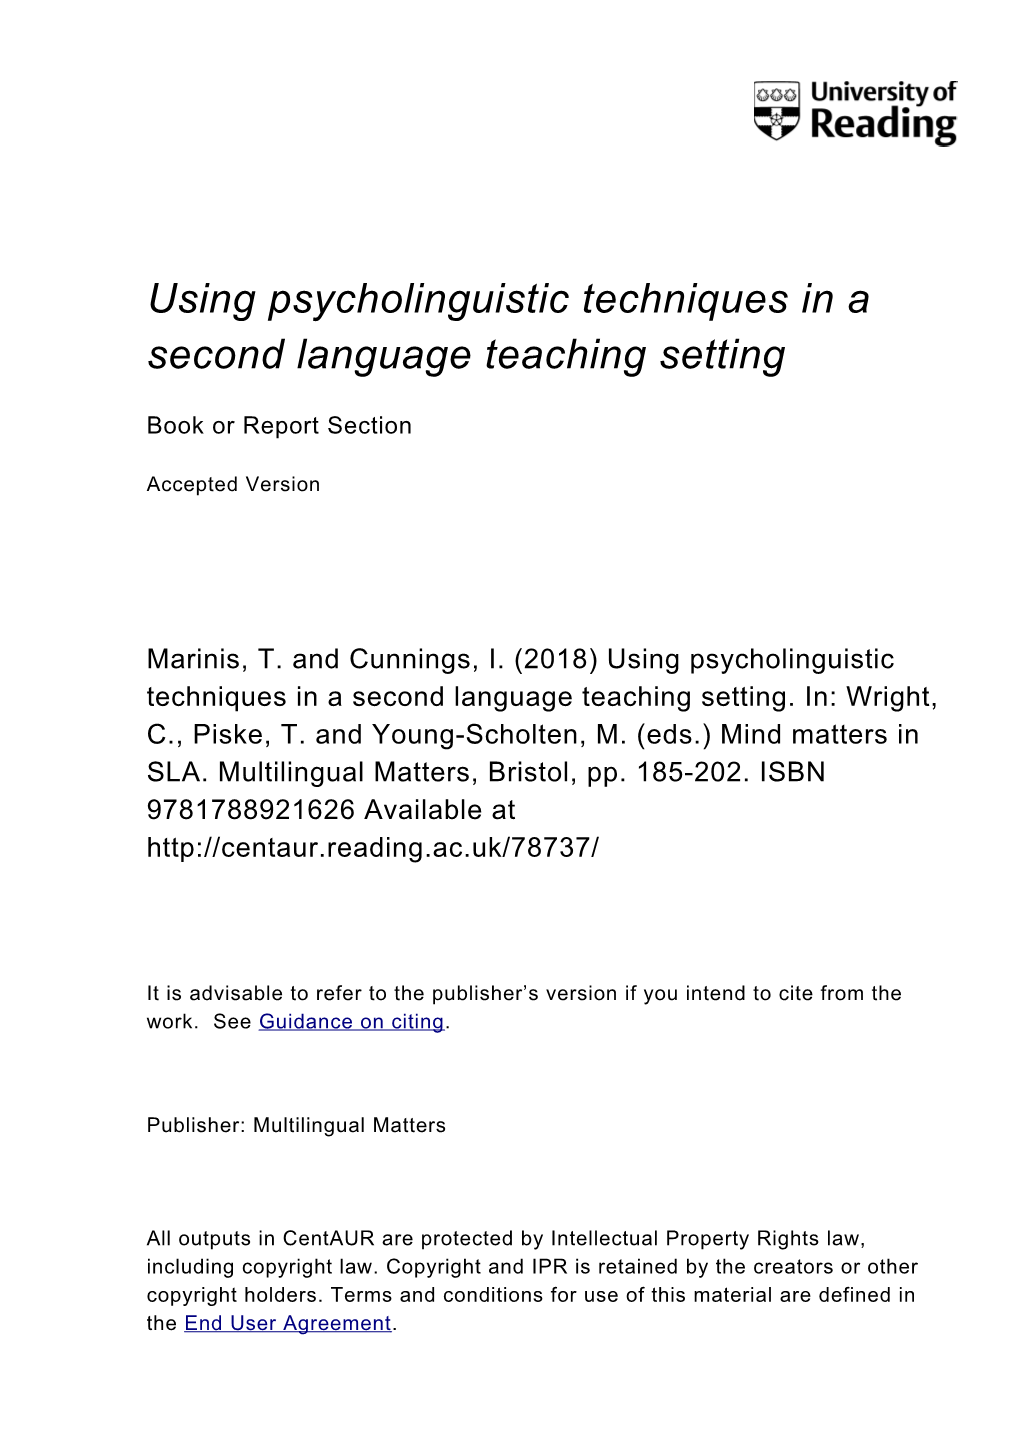 Using Psycholinguistic Techniques in a Second Language Teaching Setting